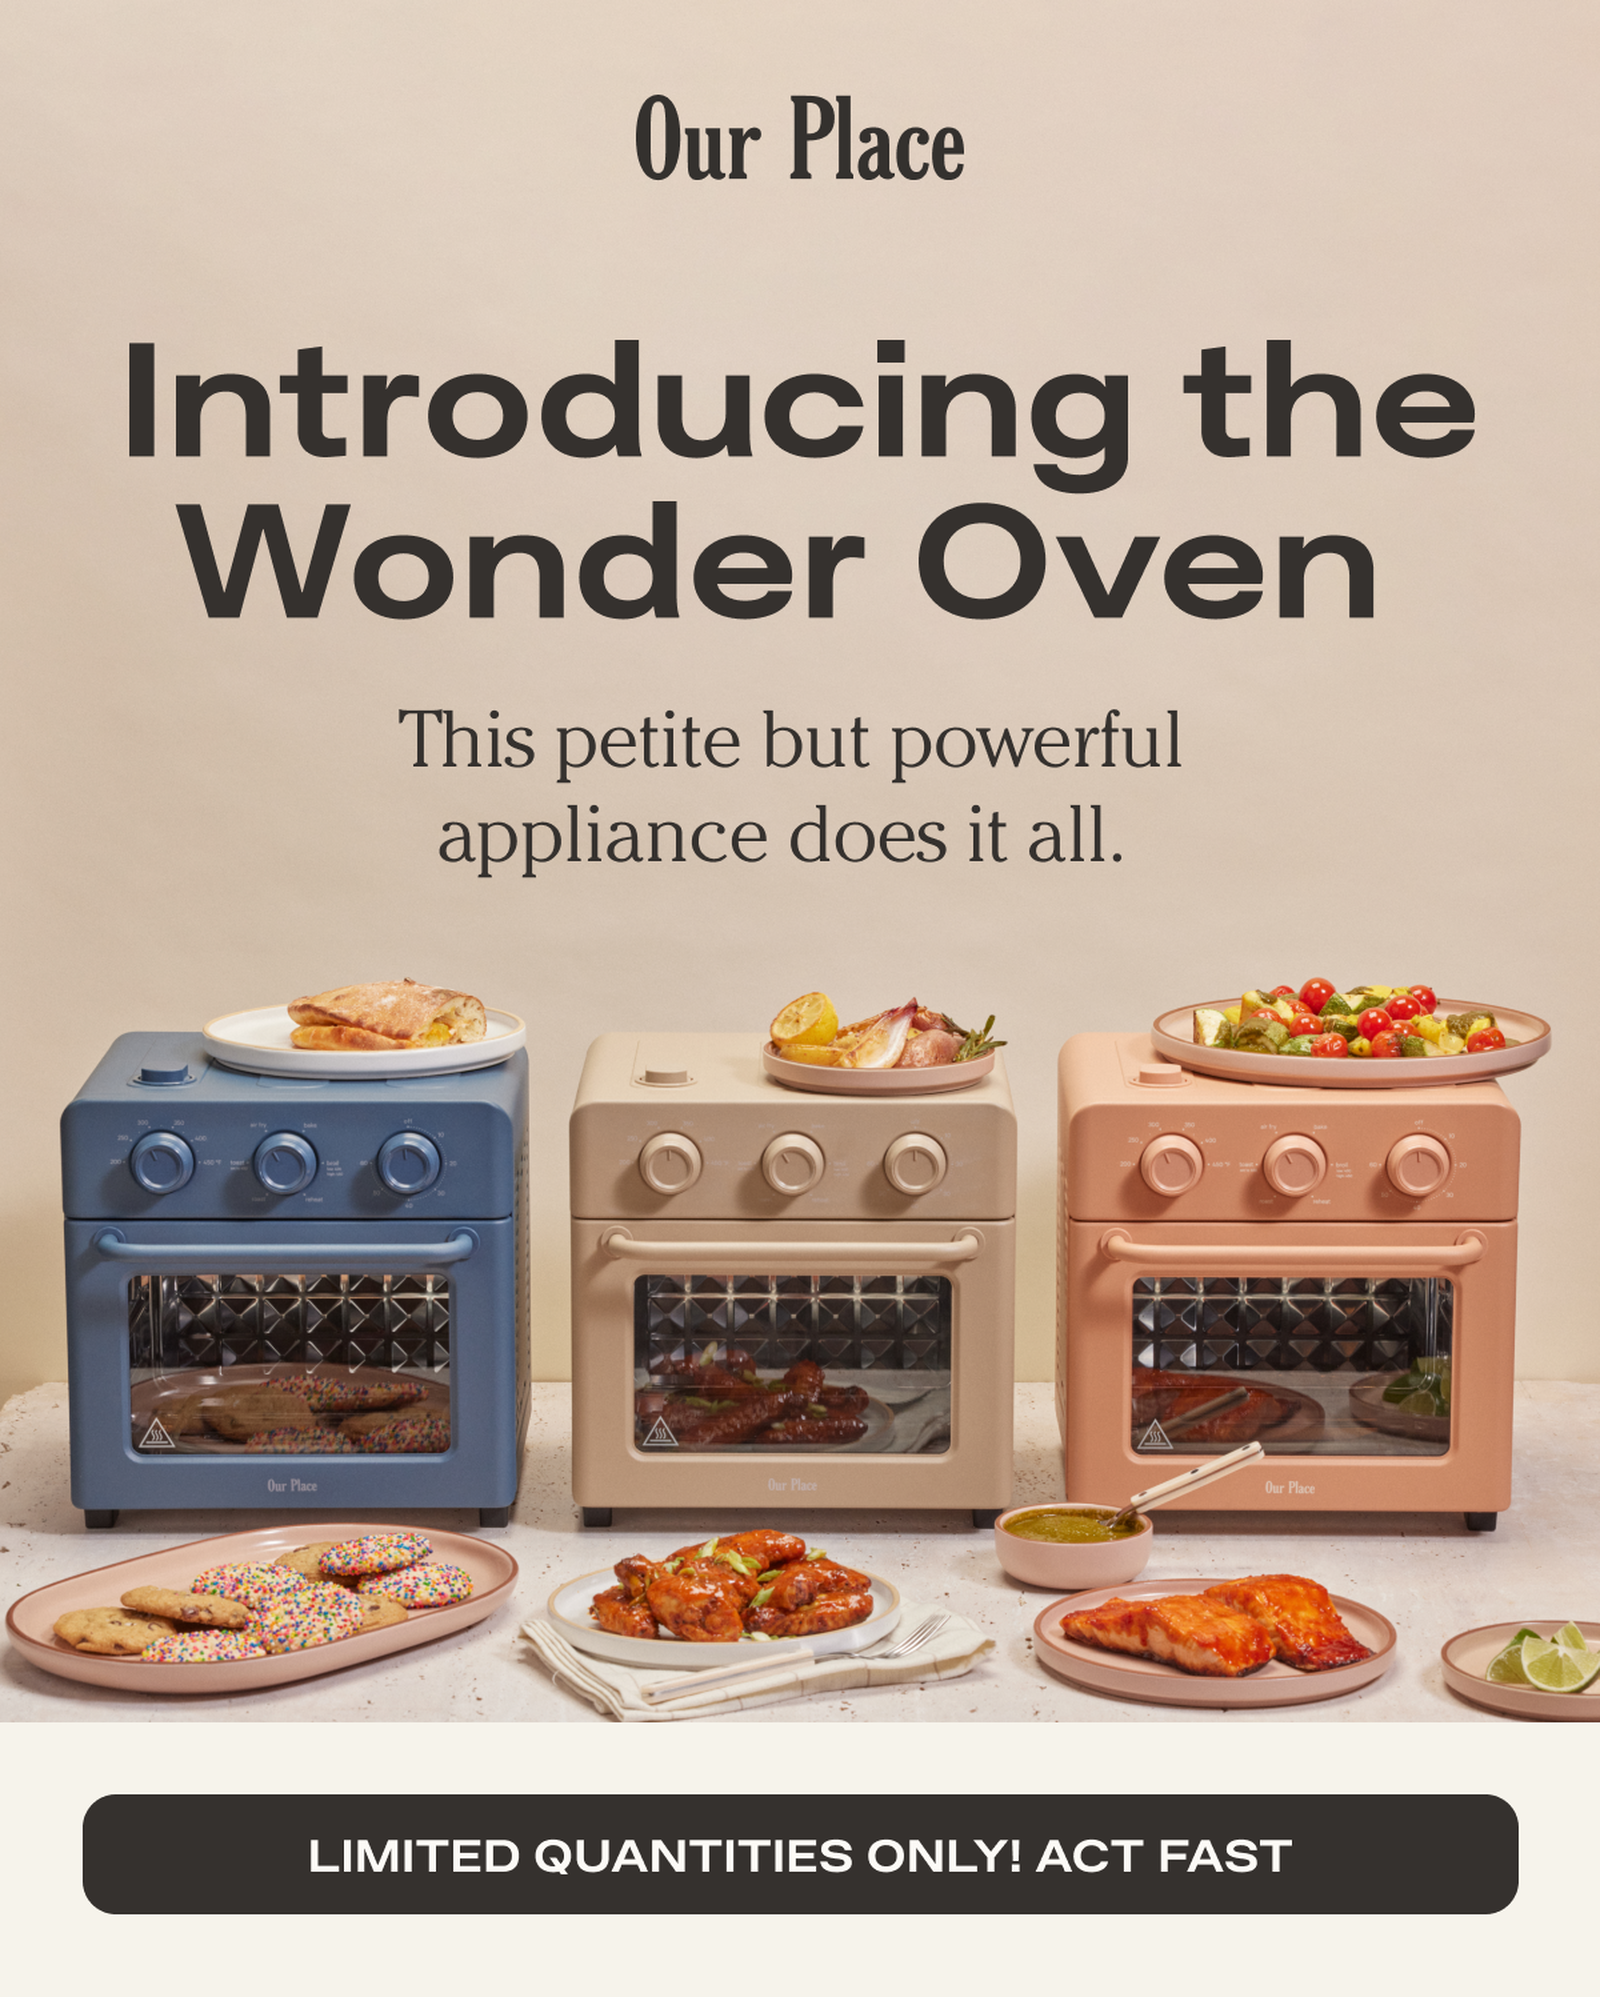 Our Place: New Drop! The Wonder Oven